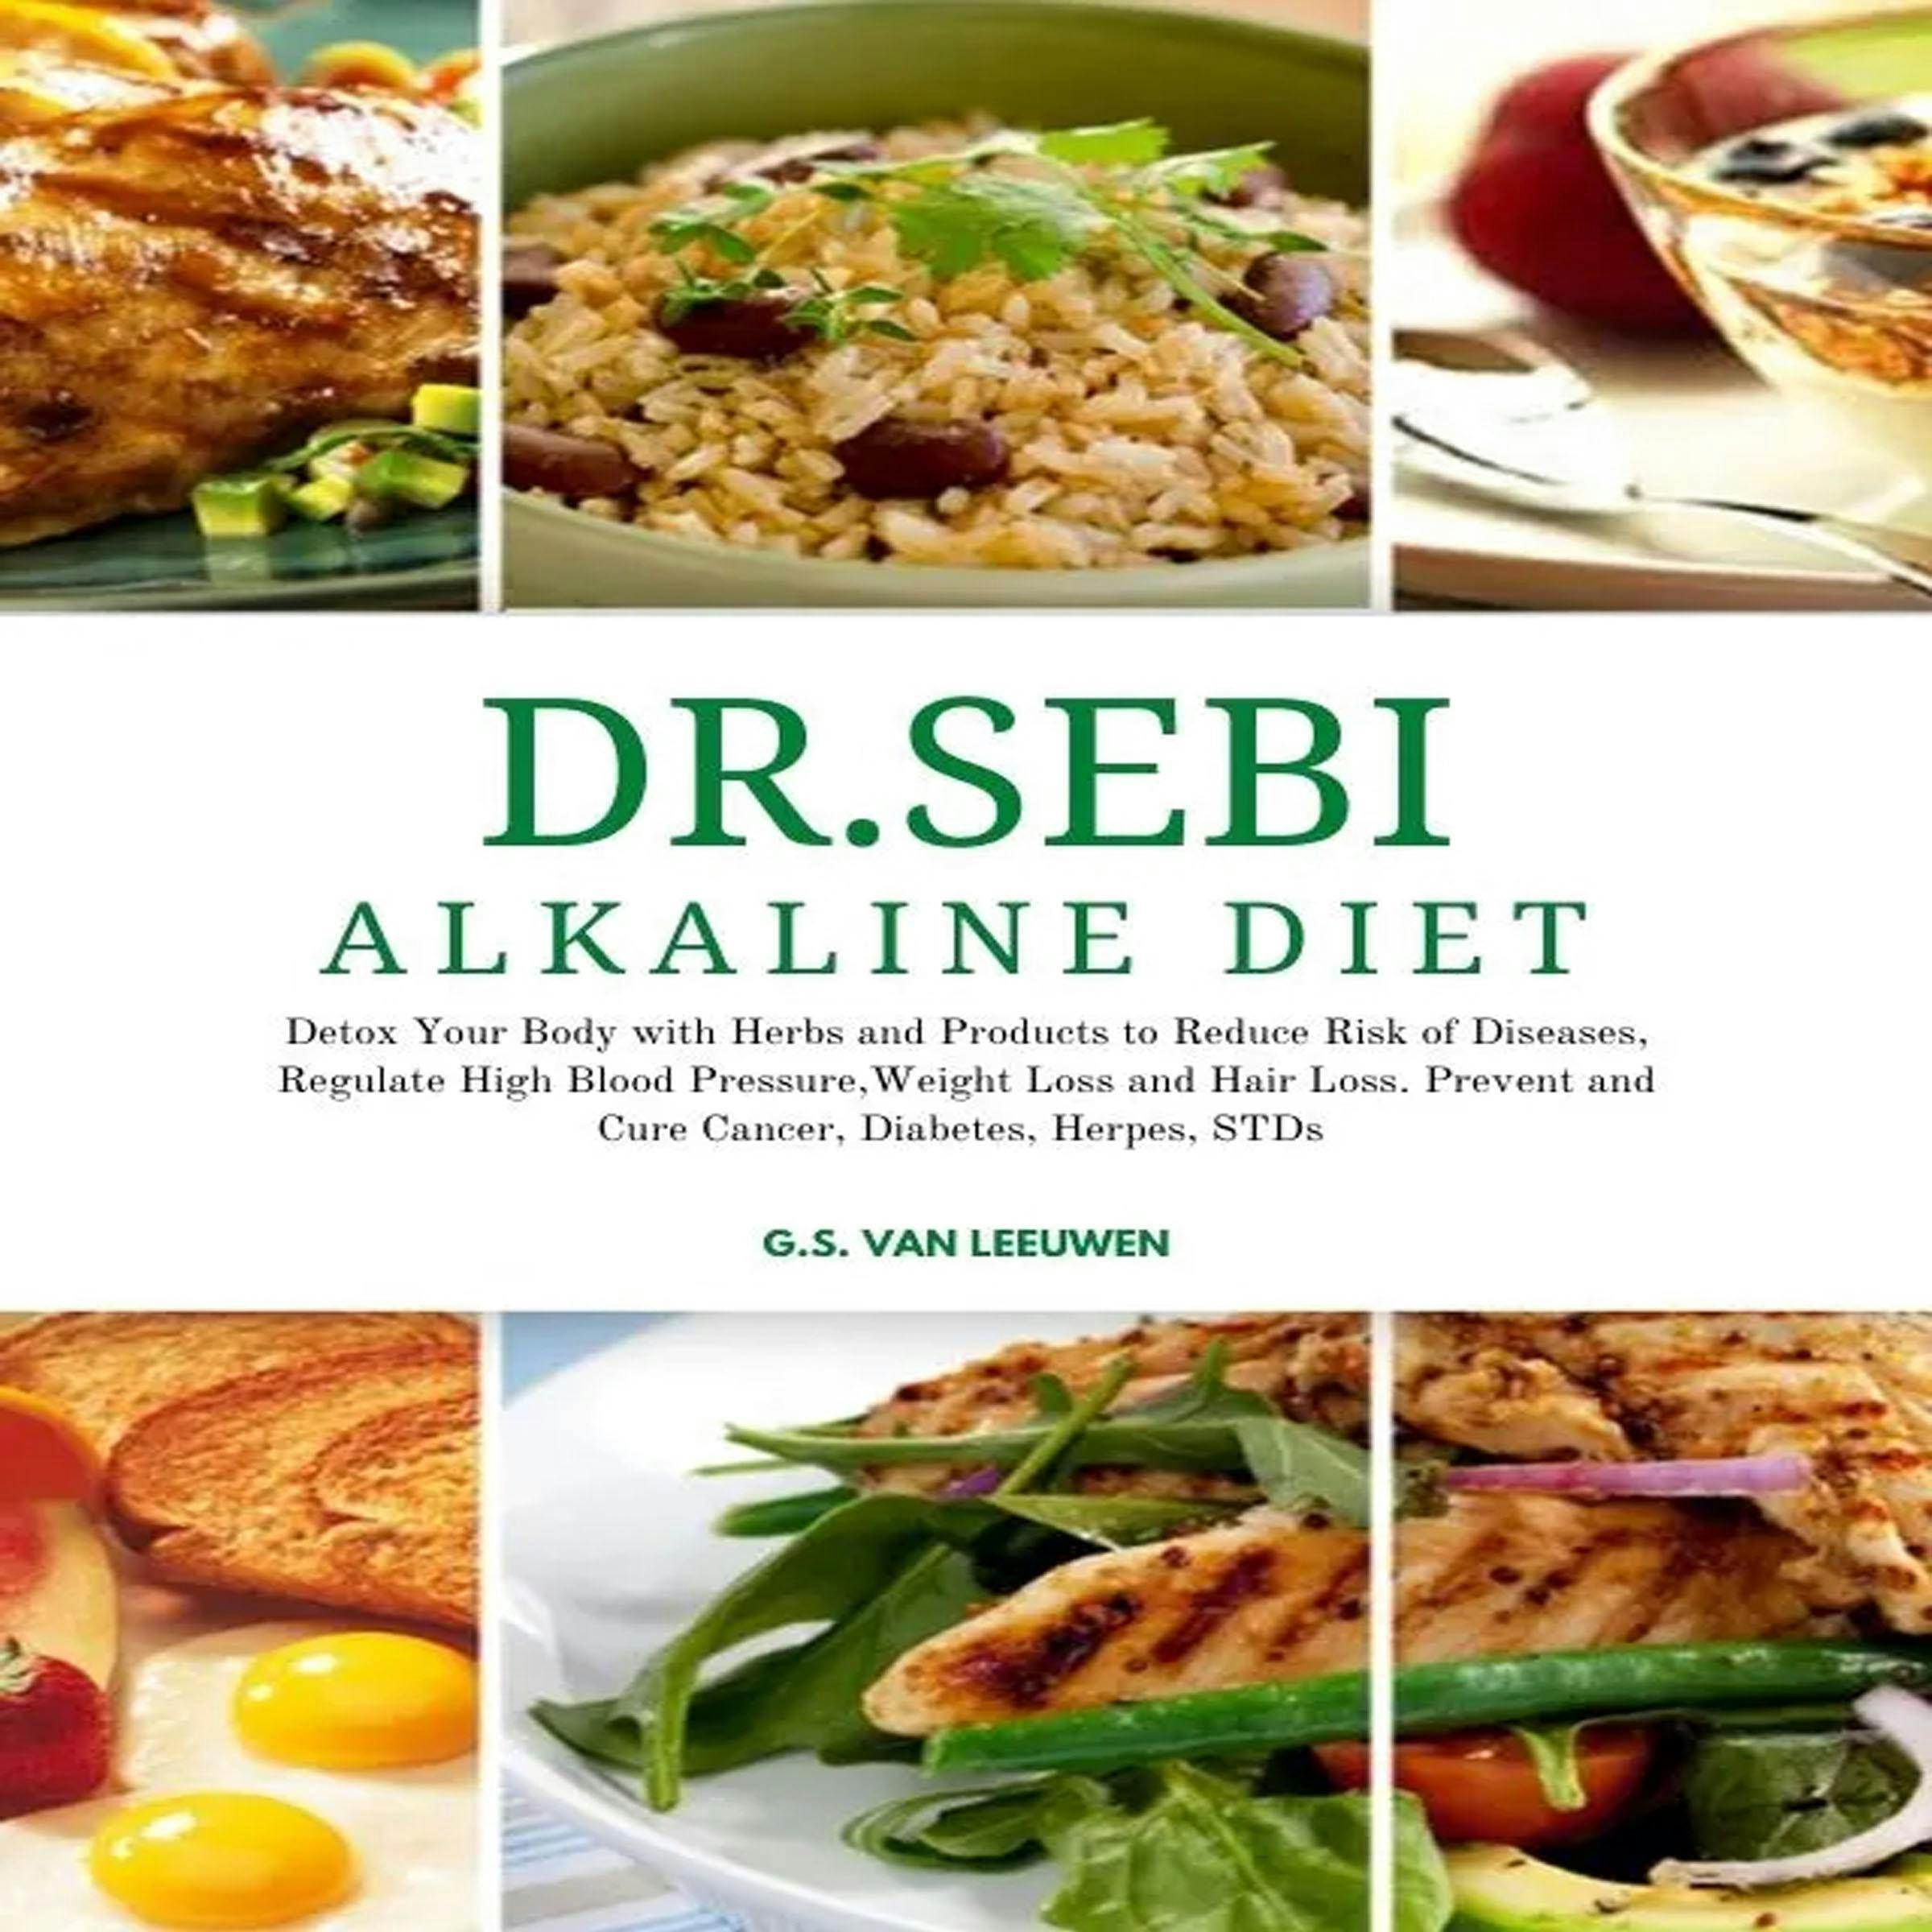 DR. SEBI ALKALINE DIET: Detox Your Body with Herbs and Products to Reduce Risk of Diseases, Regulate High Blood Pressure, Weight Loss and Hair Loss. Prevent and Cure Cancer, Diabetes. Herpes and STDs - undefined